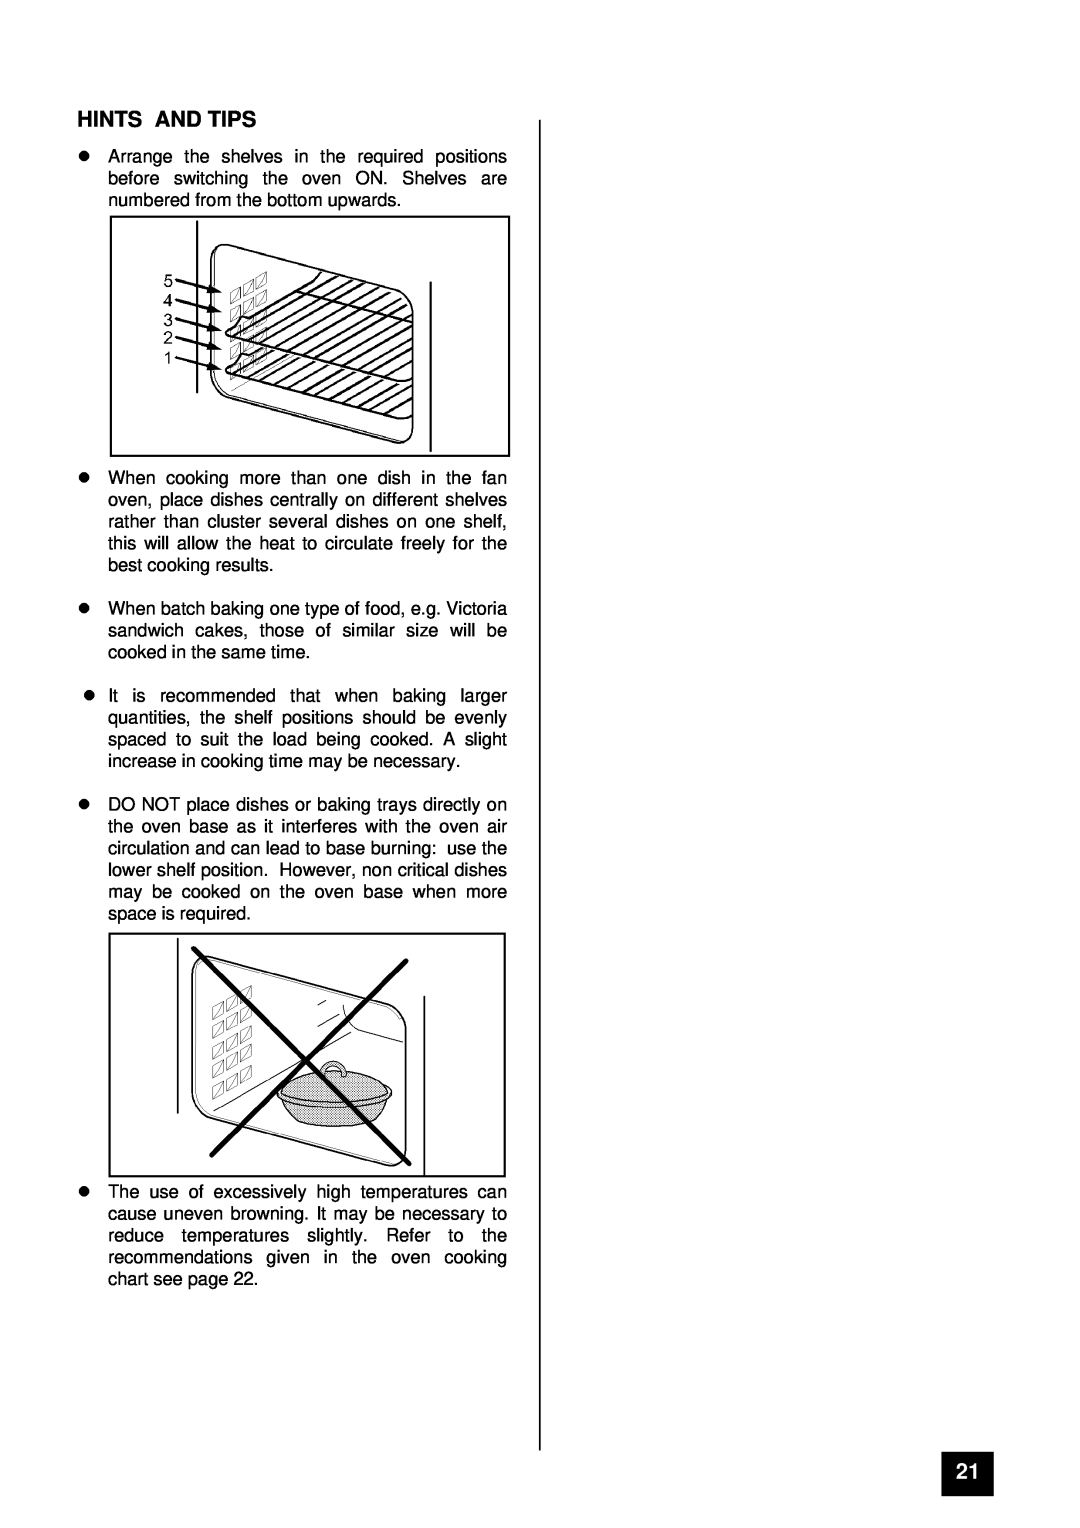 Tricity Bendix RE60GC installation instructions lHINTS AND TIPS, lincrease in cooking time may be necessary 